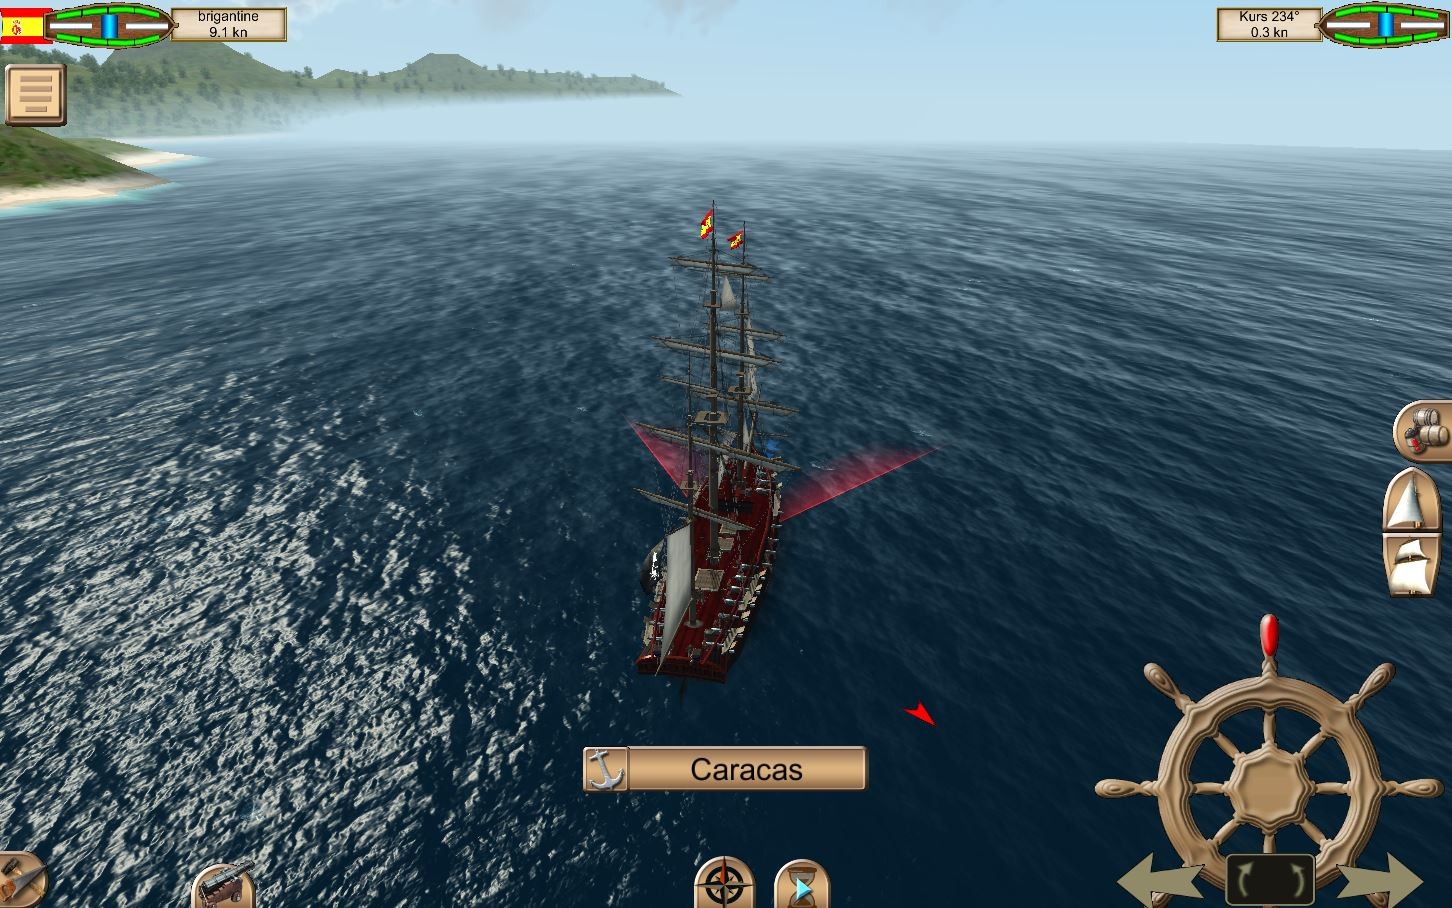 how to board a ship in the pirate caribbean hunt